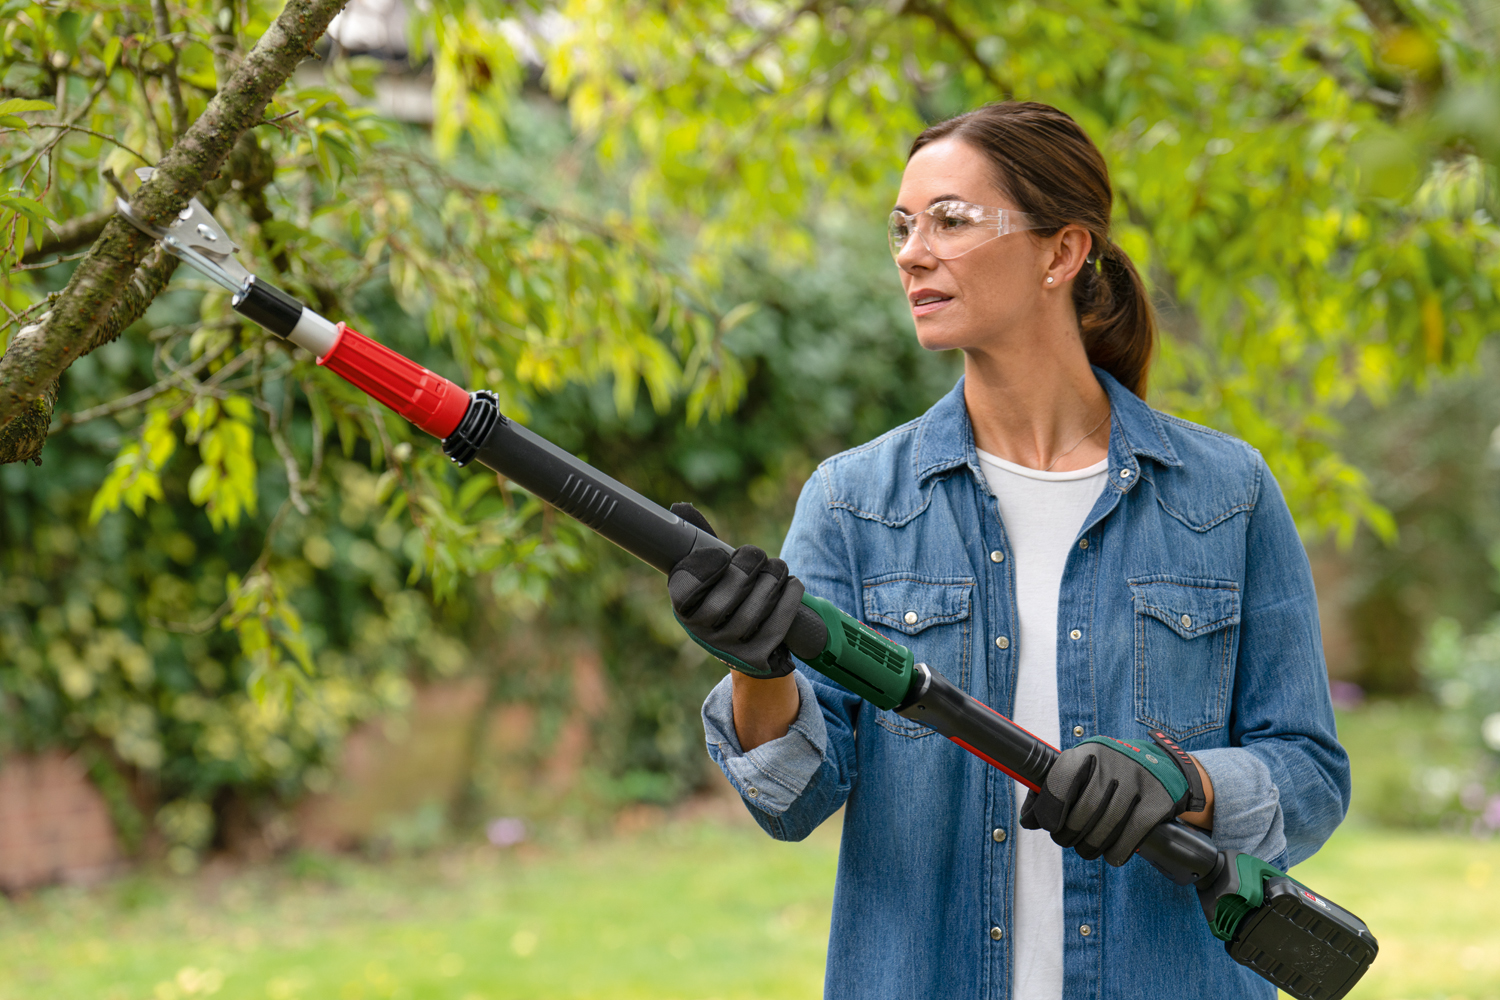 AdvancedPrune 18V-45 cordless pruner from Bosch for DIY gardeners:  Innovative 360-degree trigger for optimum grip at any cutting angle